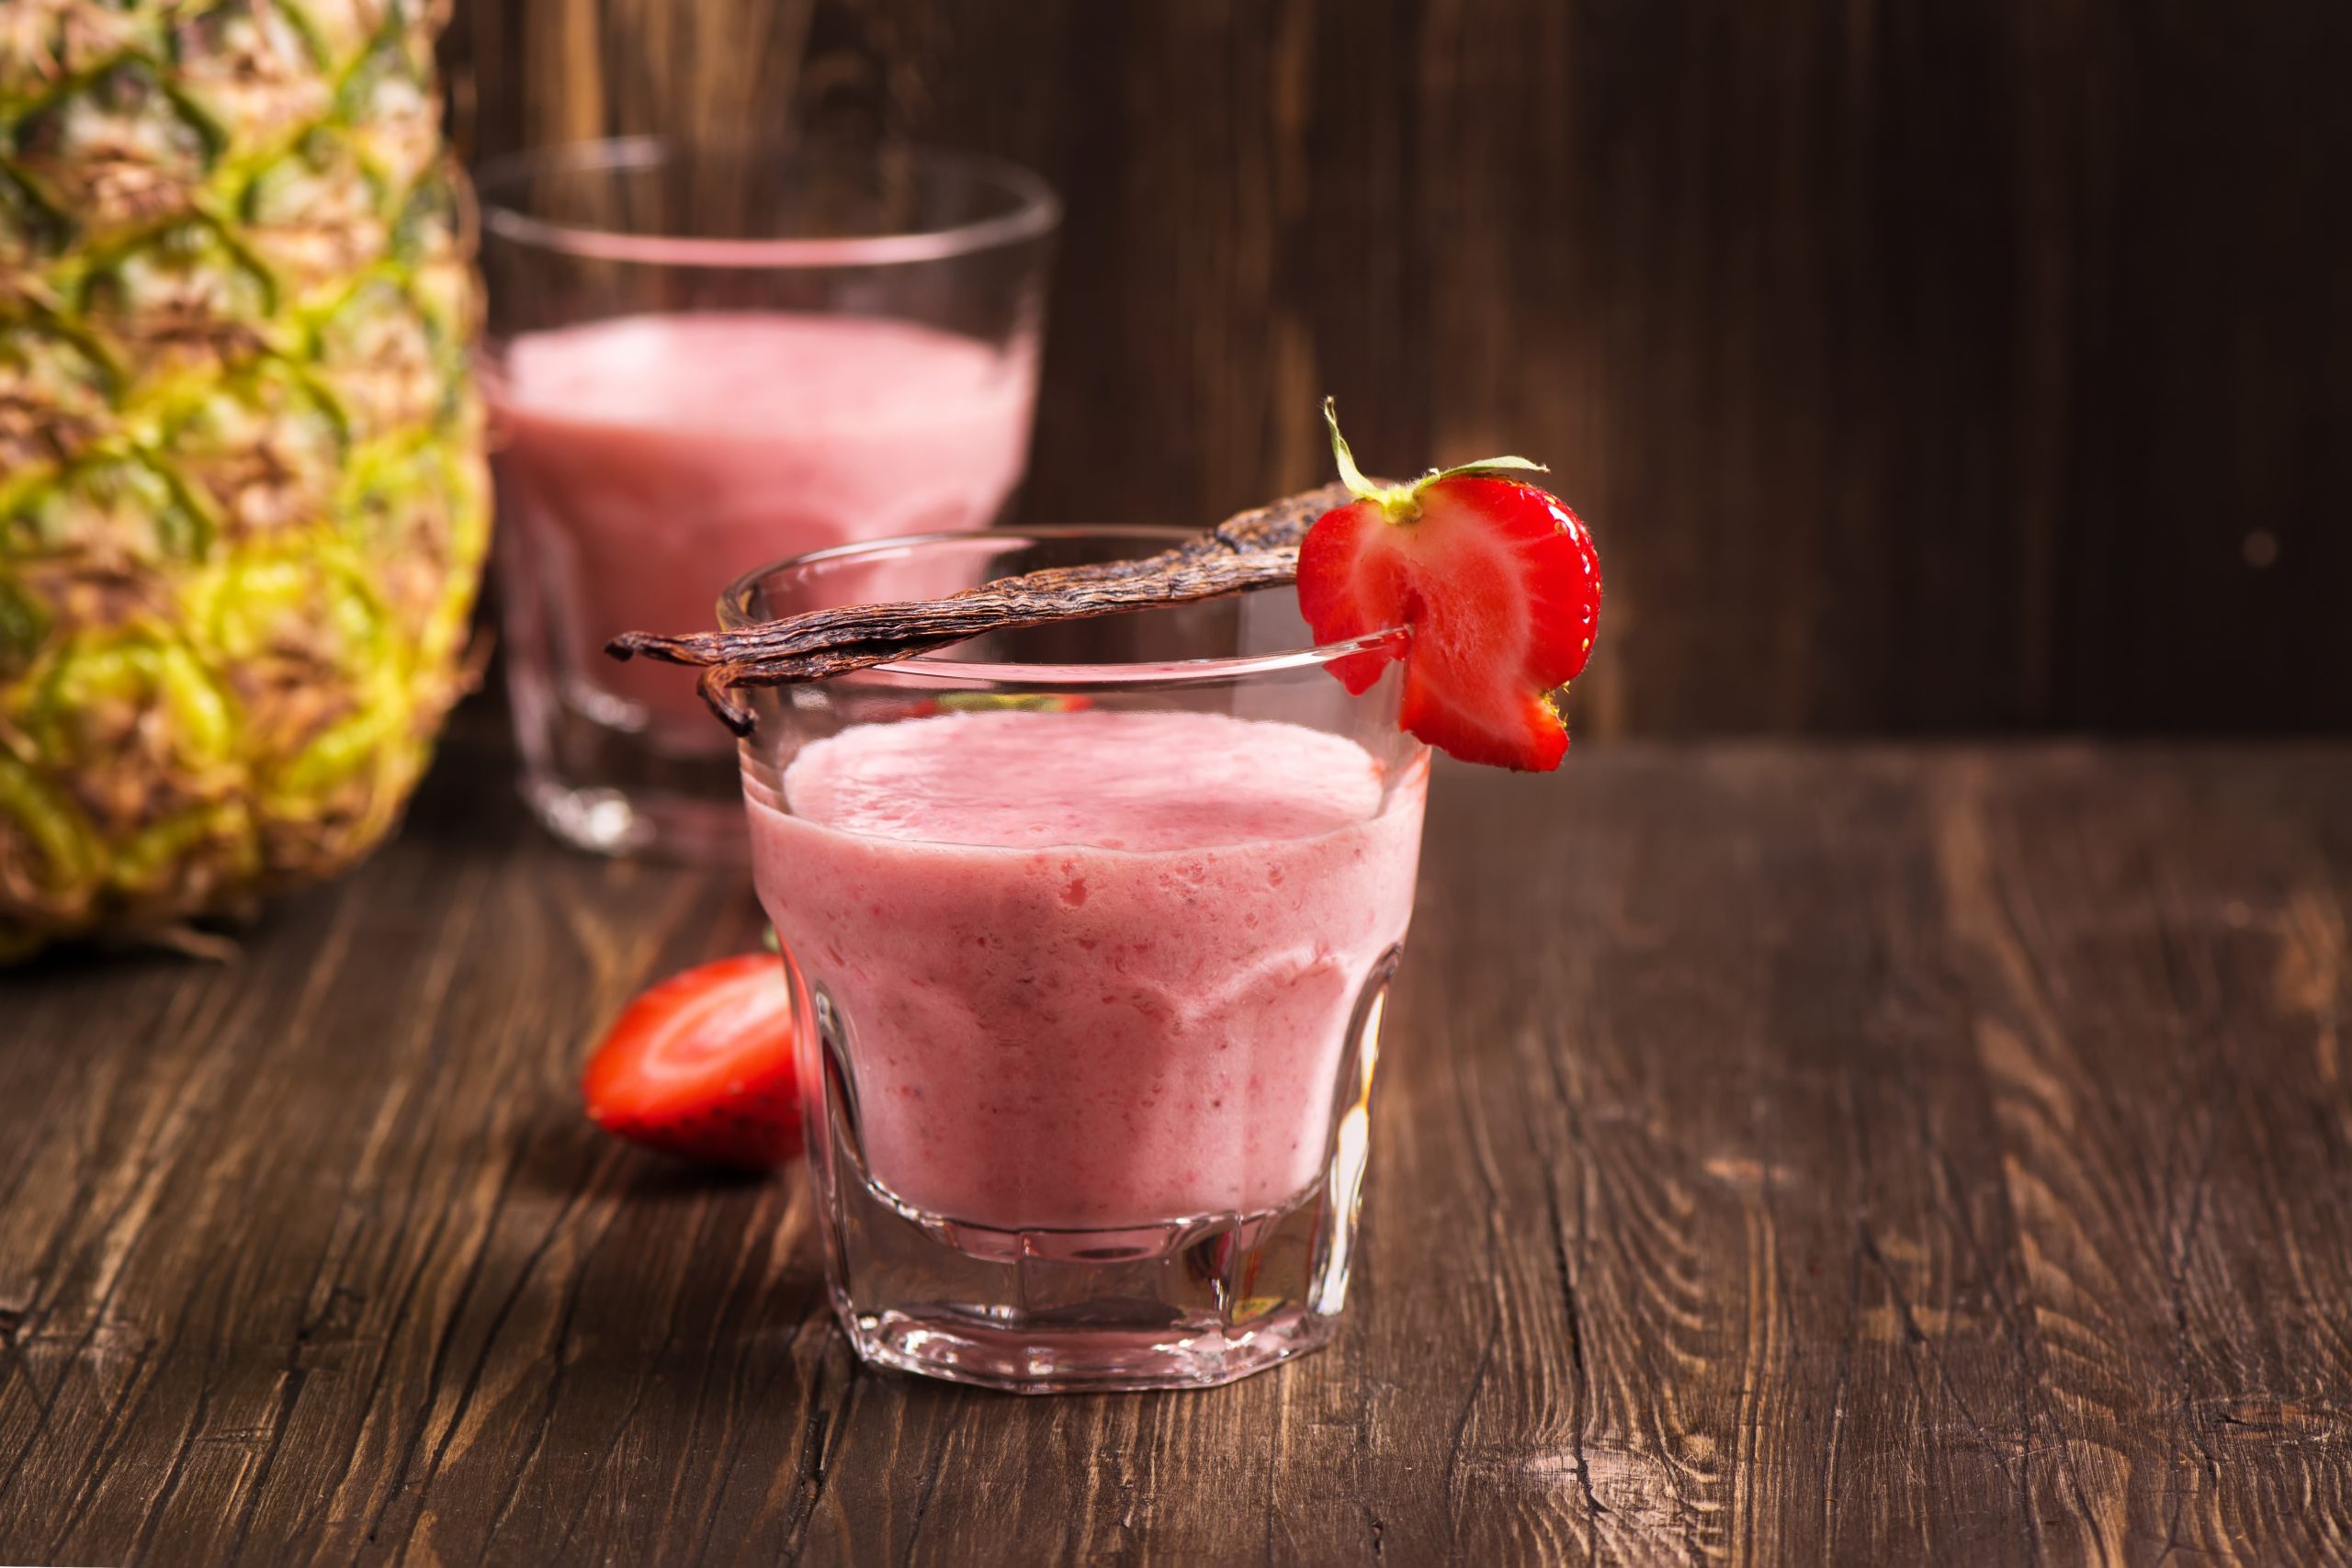 Vitamin C-Rich Pineapple and Strawberry Protein Smoothie